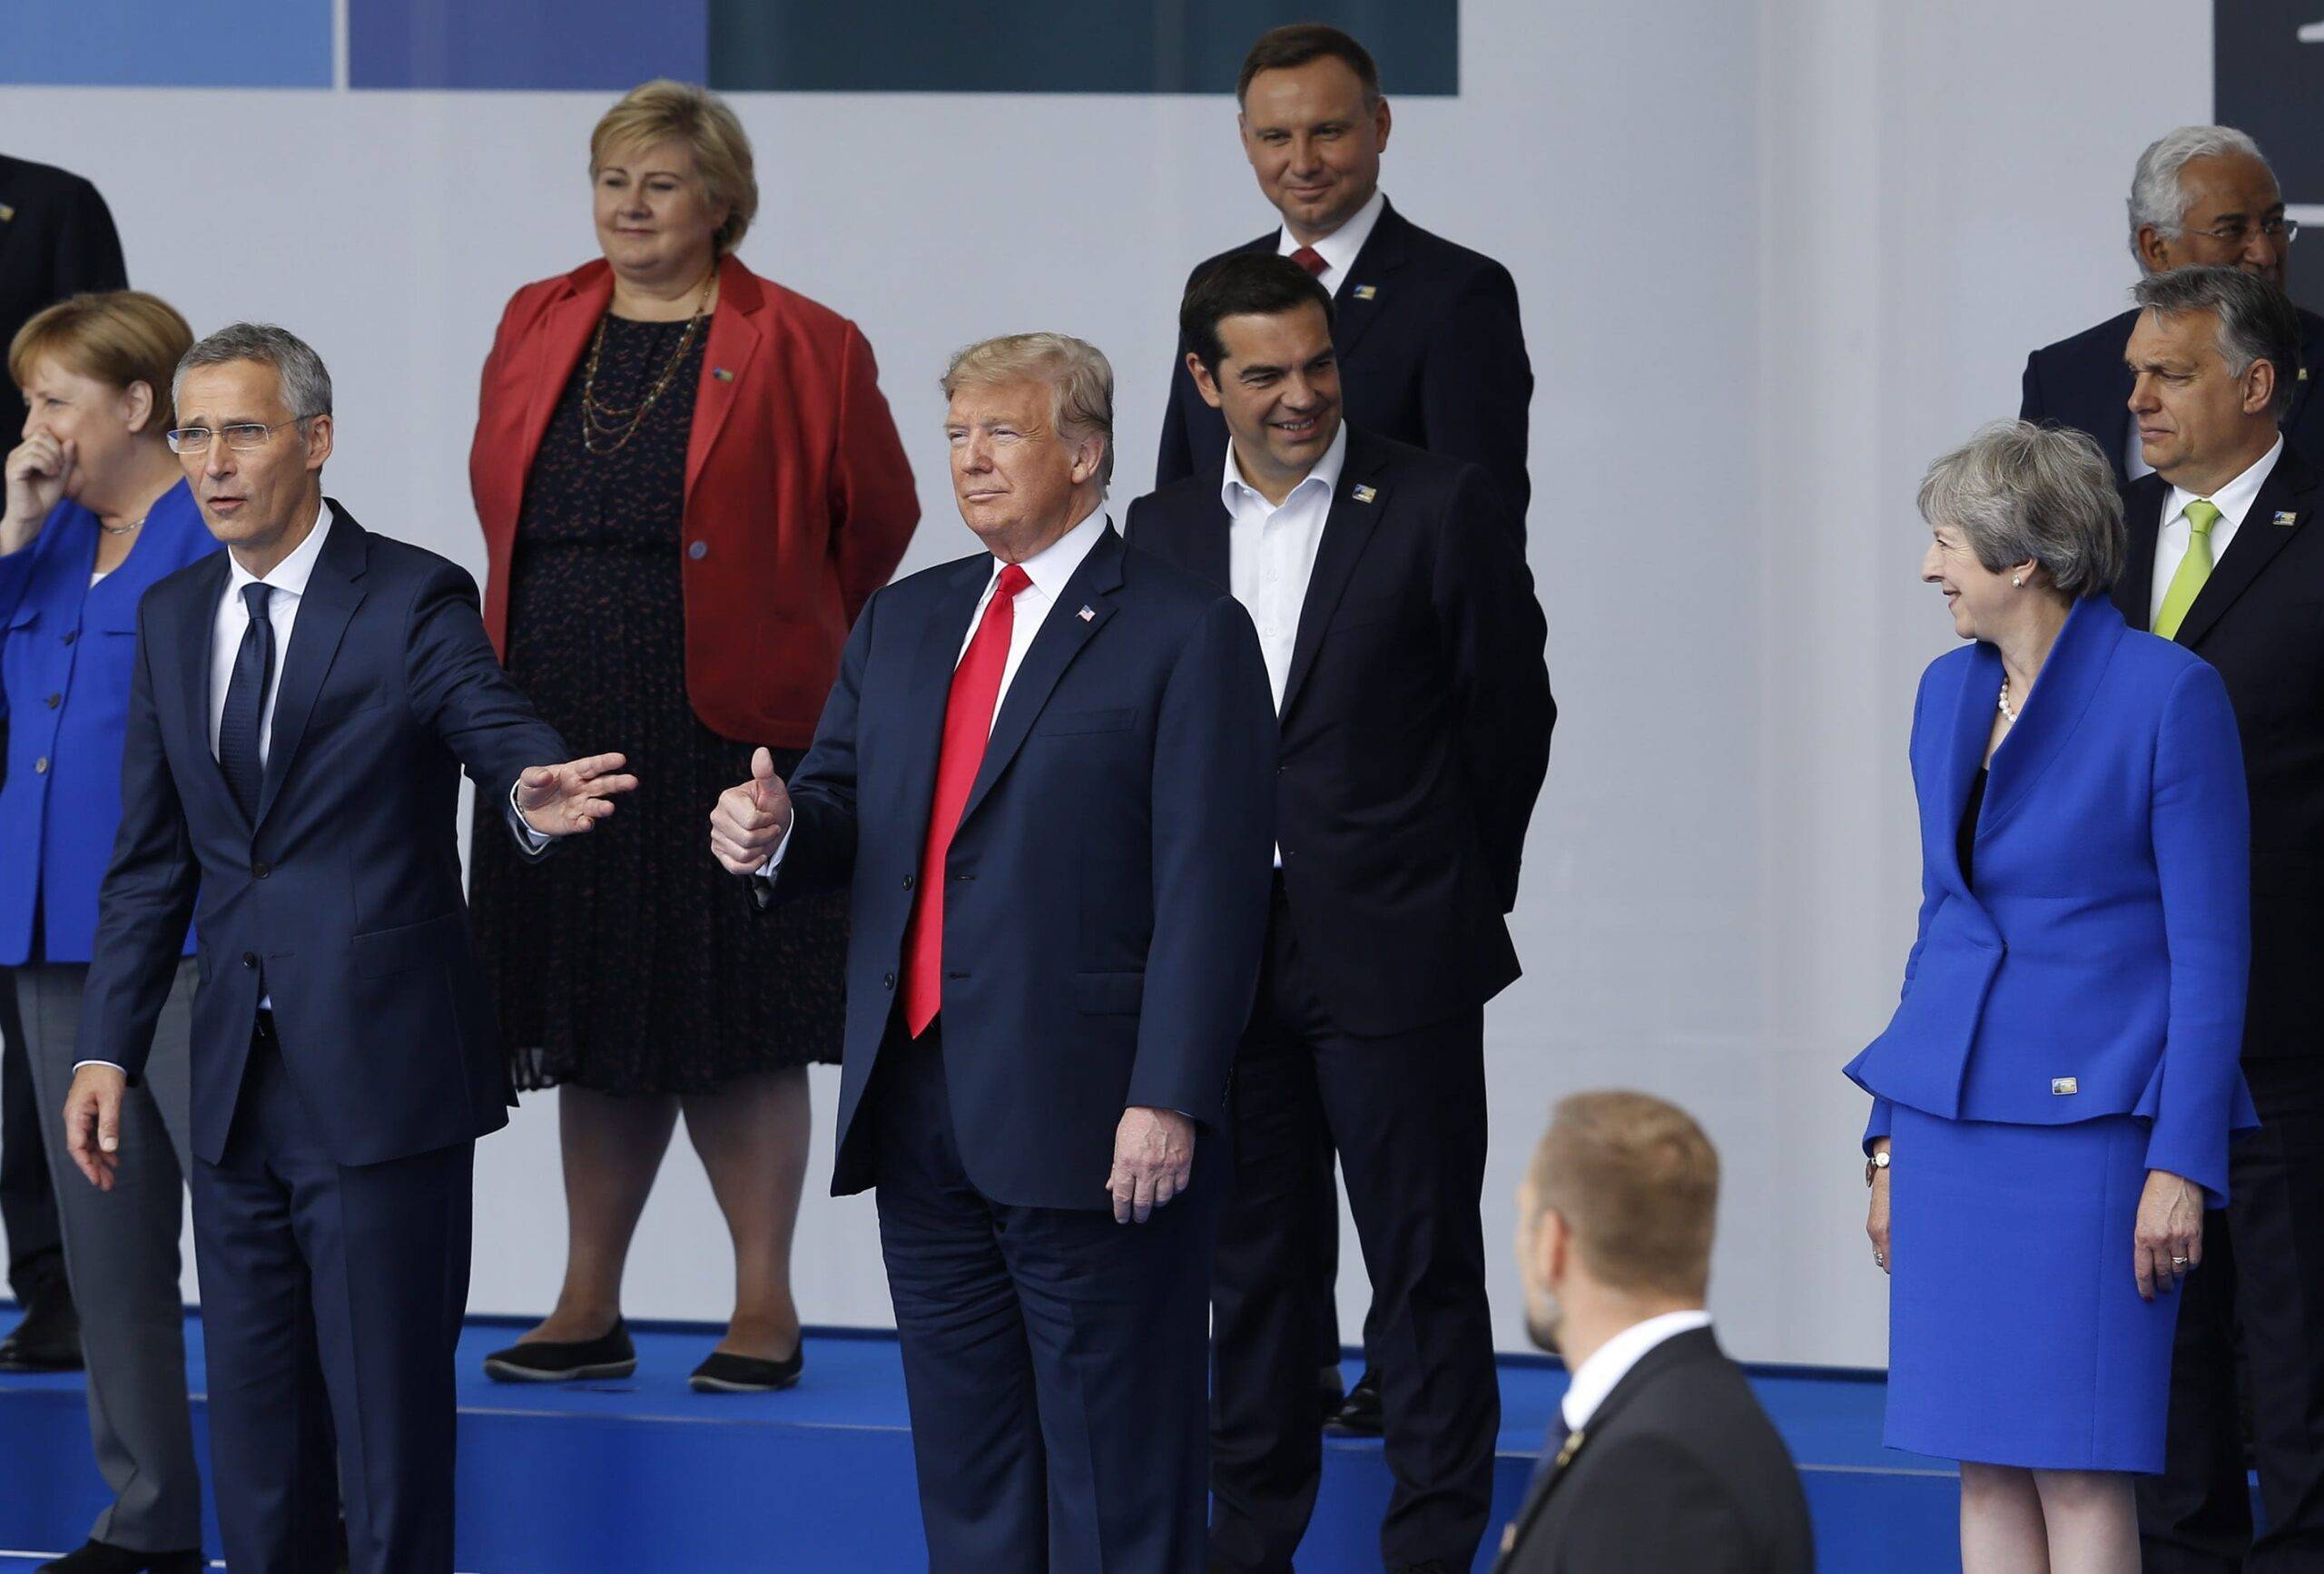 U.S. President Donald Trump (C), British Prime Minister Theresa May (R) and NATO Secretary General Jens Stoltenberg (L) attend the 2018 NATO Summit at NATO headquarters on 11 July, 2018 in Brussels, Belgium. [Murat Kaynak/Anadolu Agency]